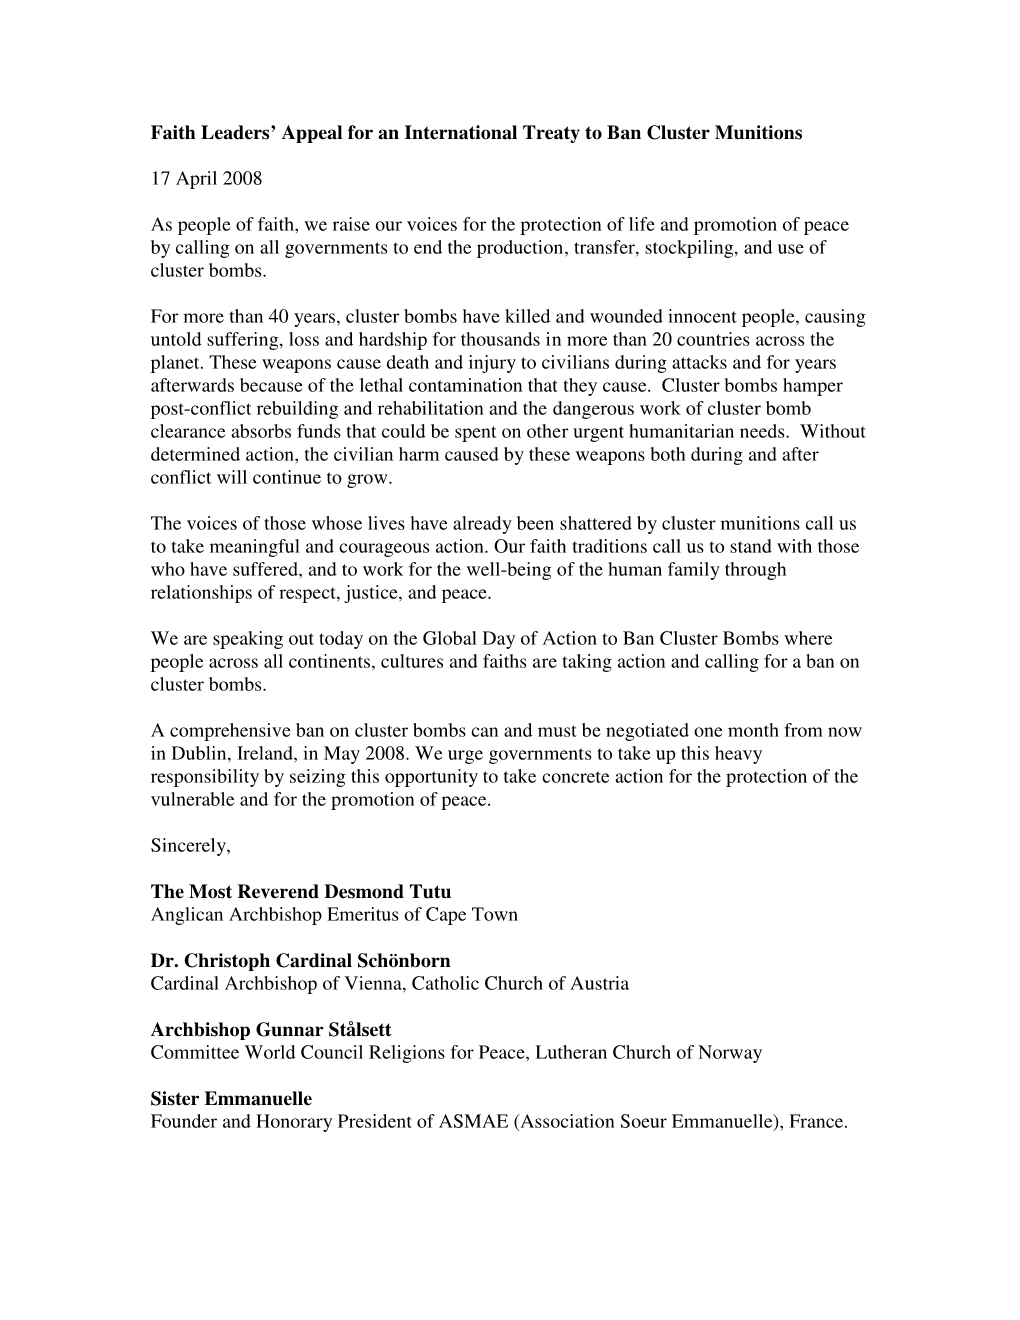 Letter from Faith Leaders Calling for Ban on Cluster Munitions